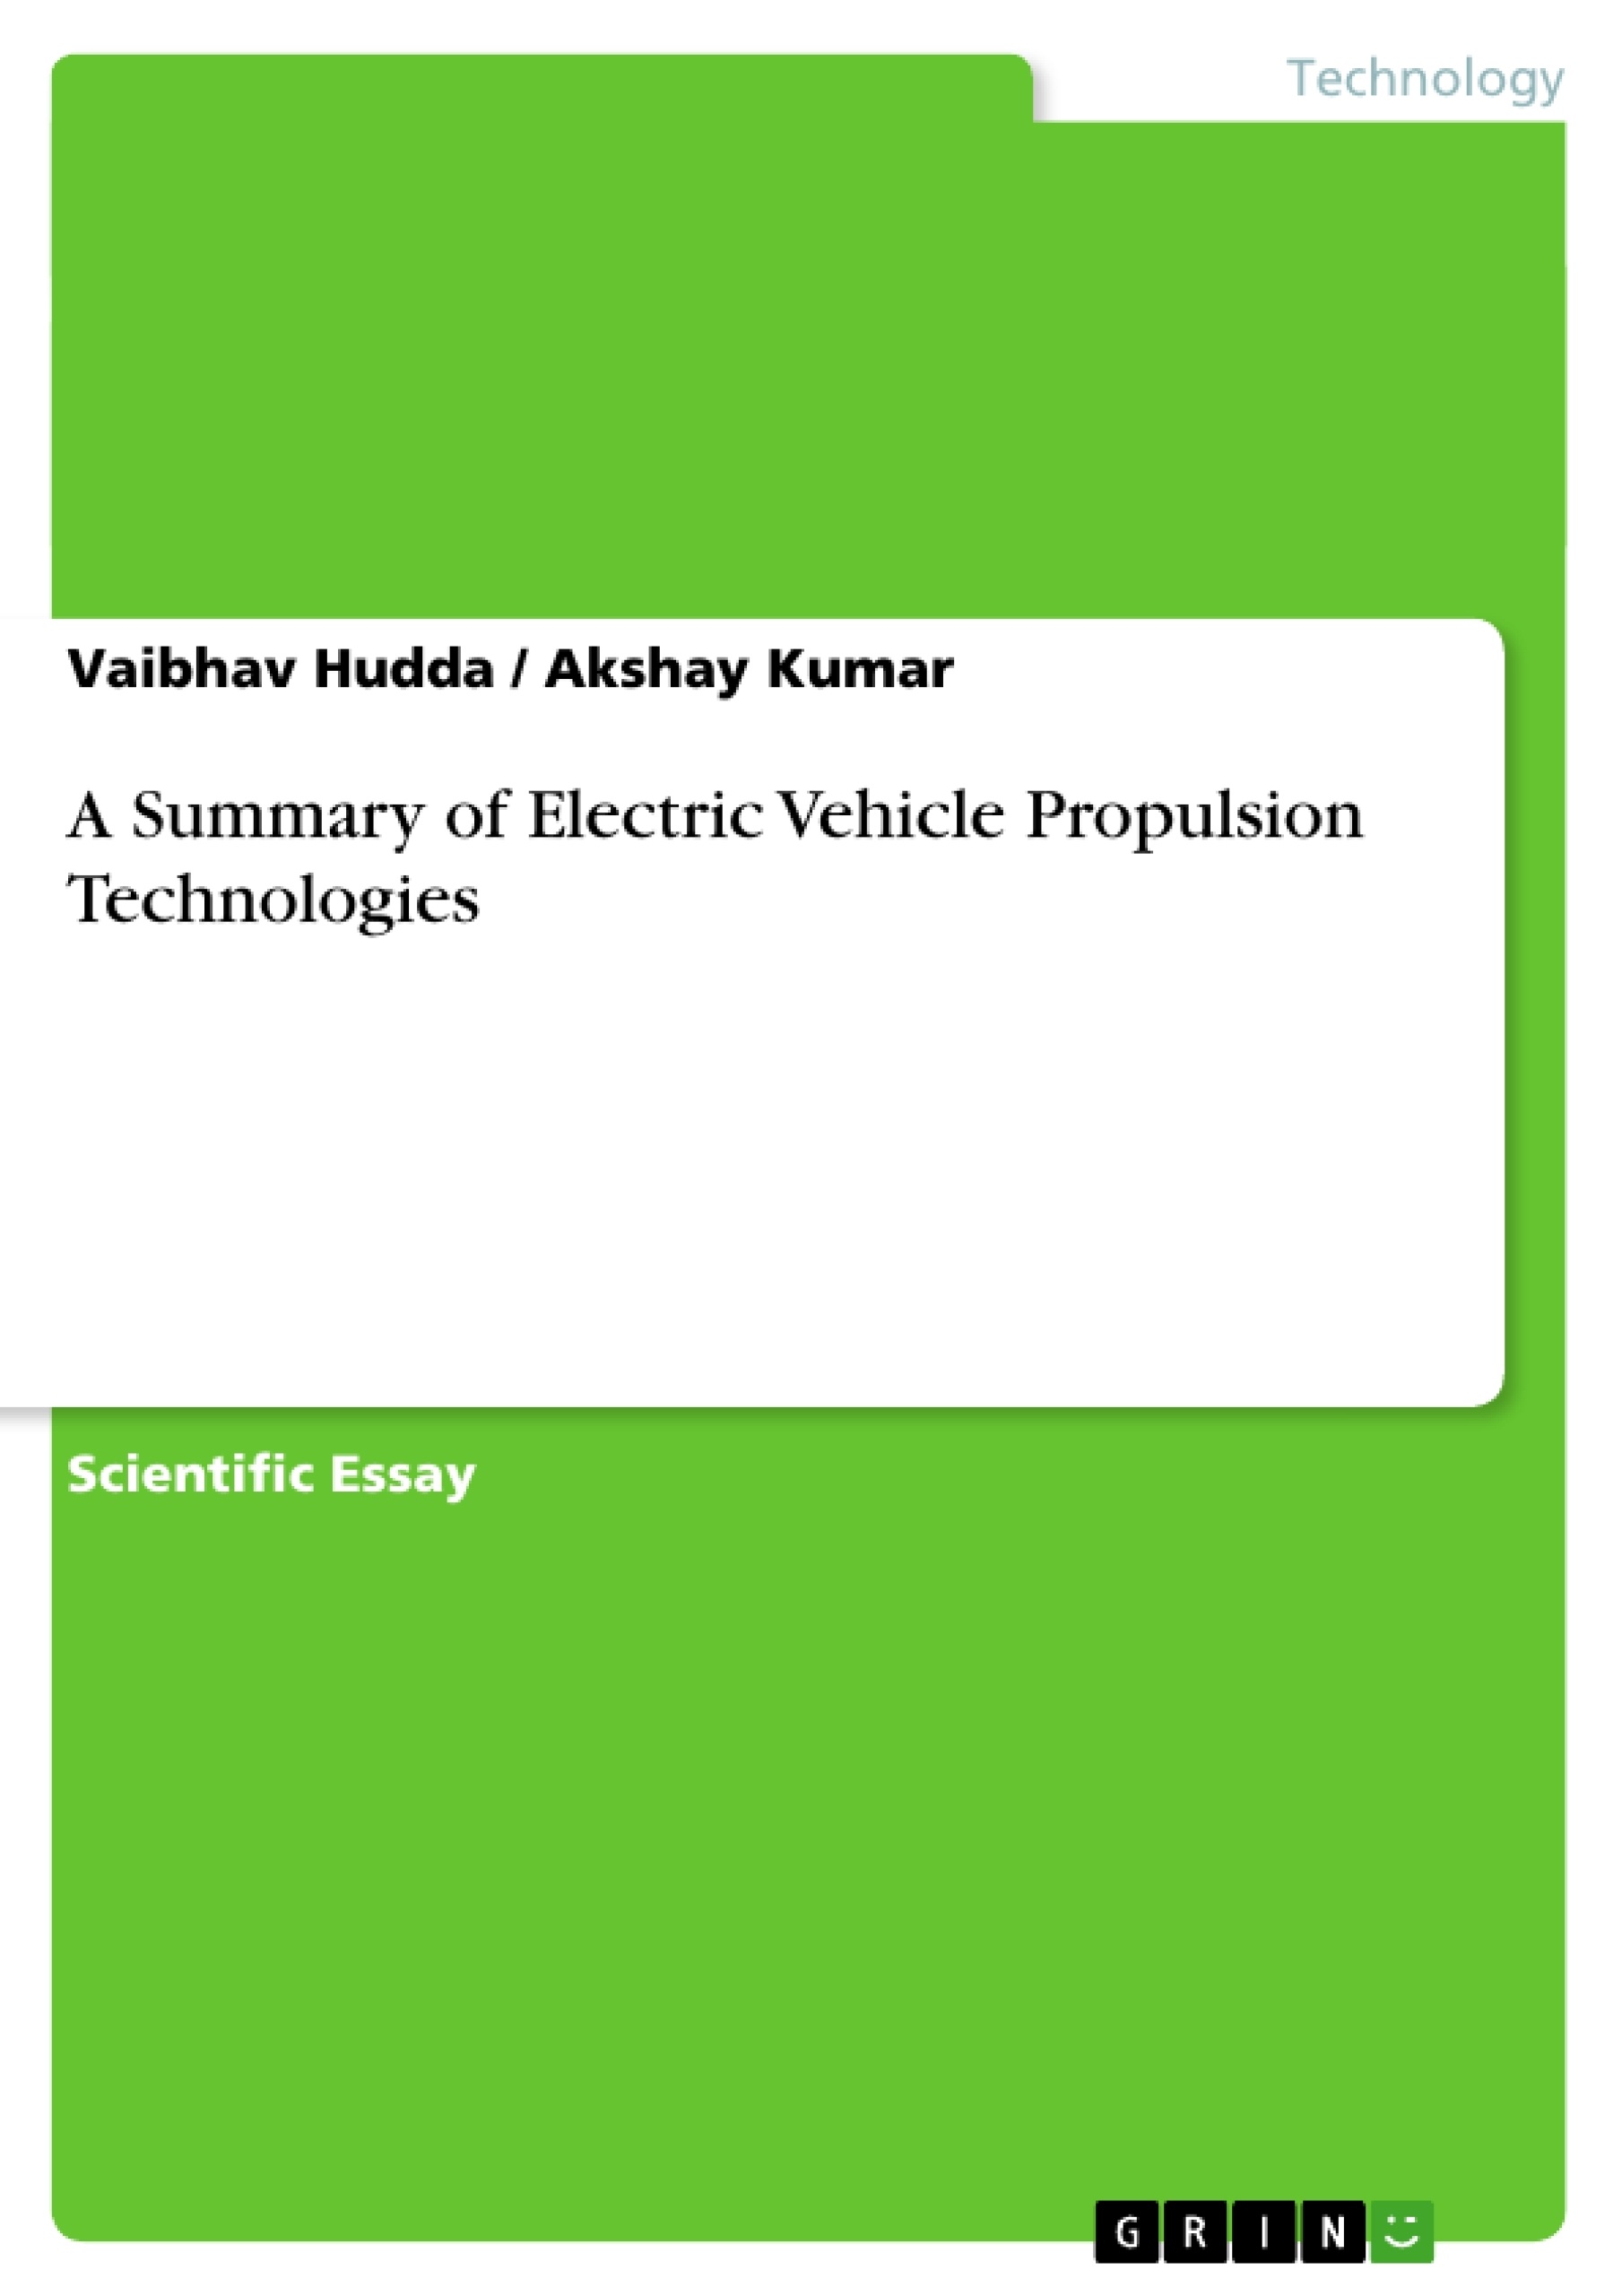 Title: A Summary of Electric Vehicle Propulsion Technologies